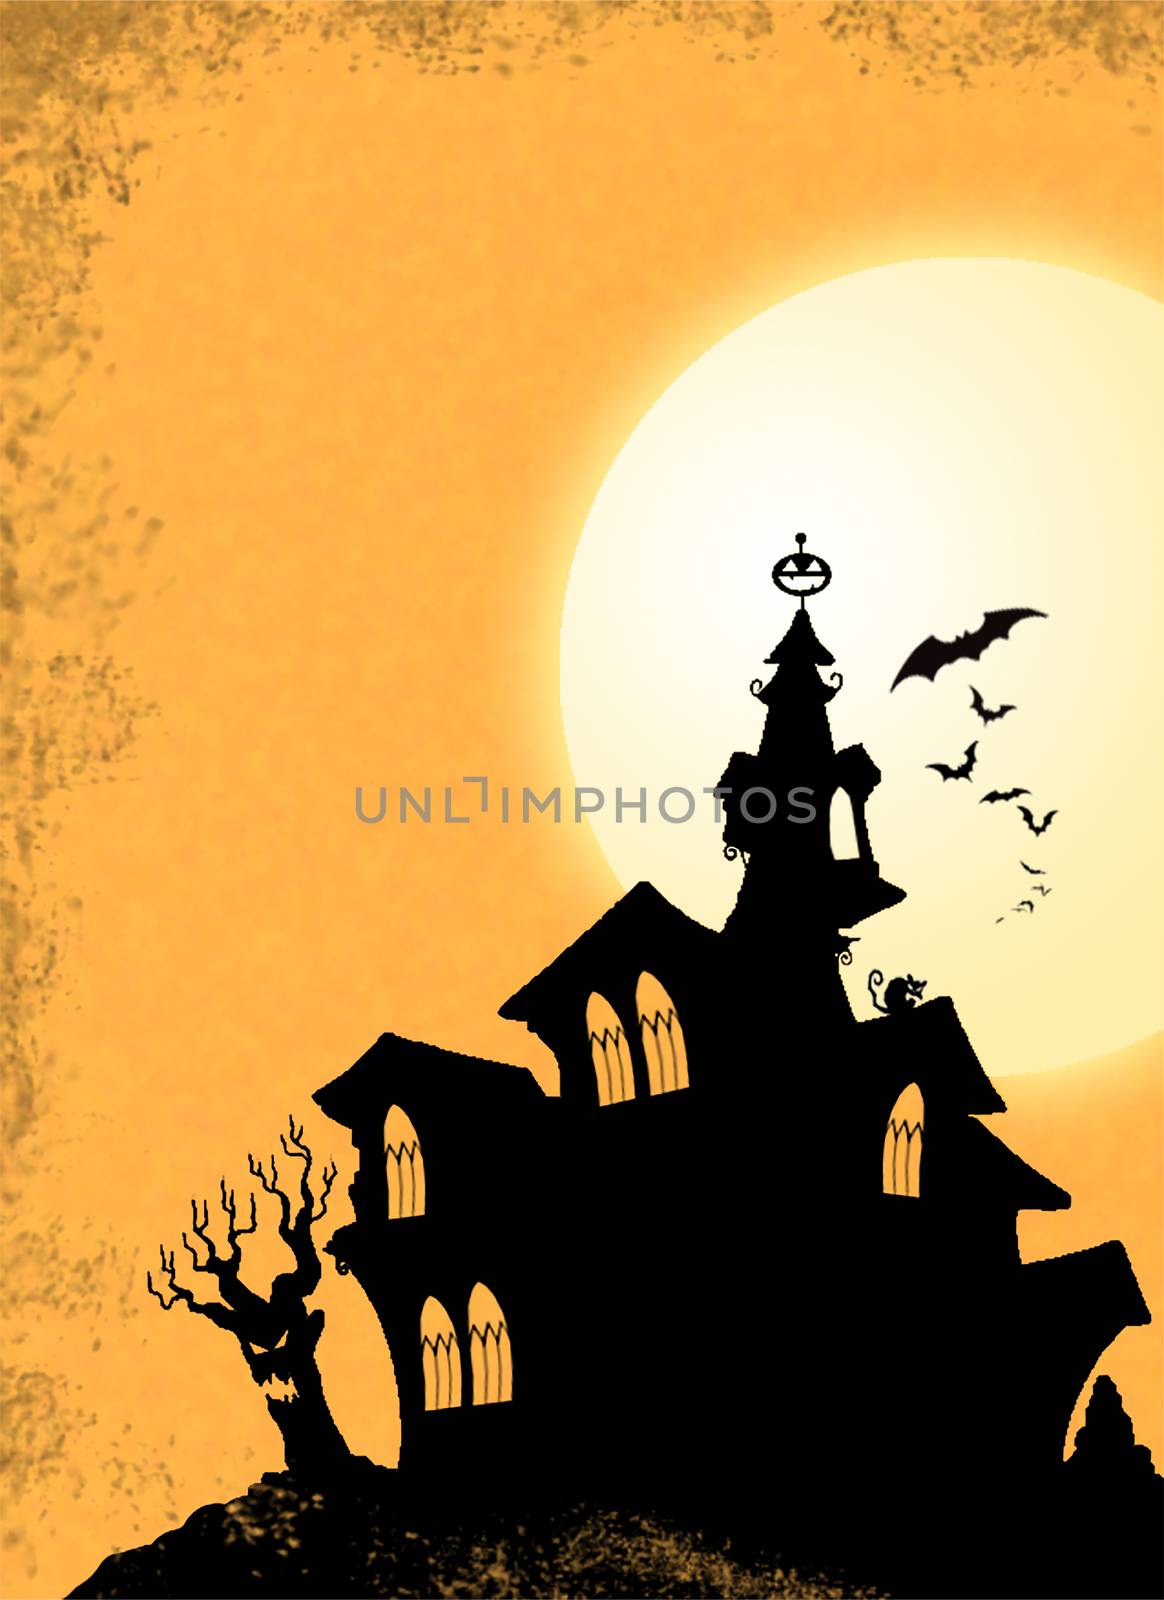 Halloween Black Haunted House Silhouette on Hill with Bats and N by illstudio